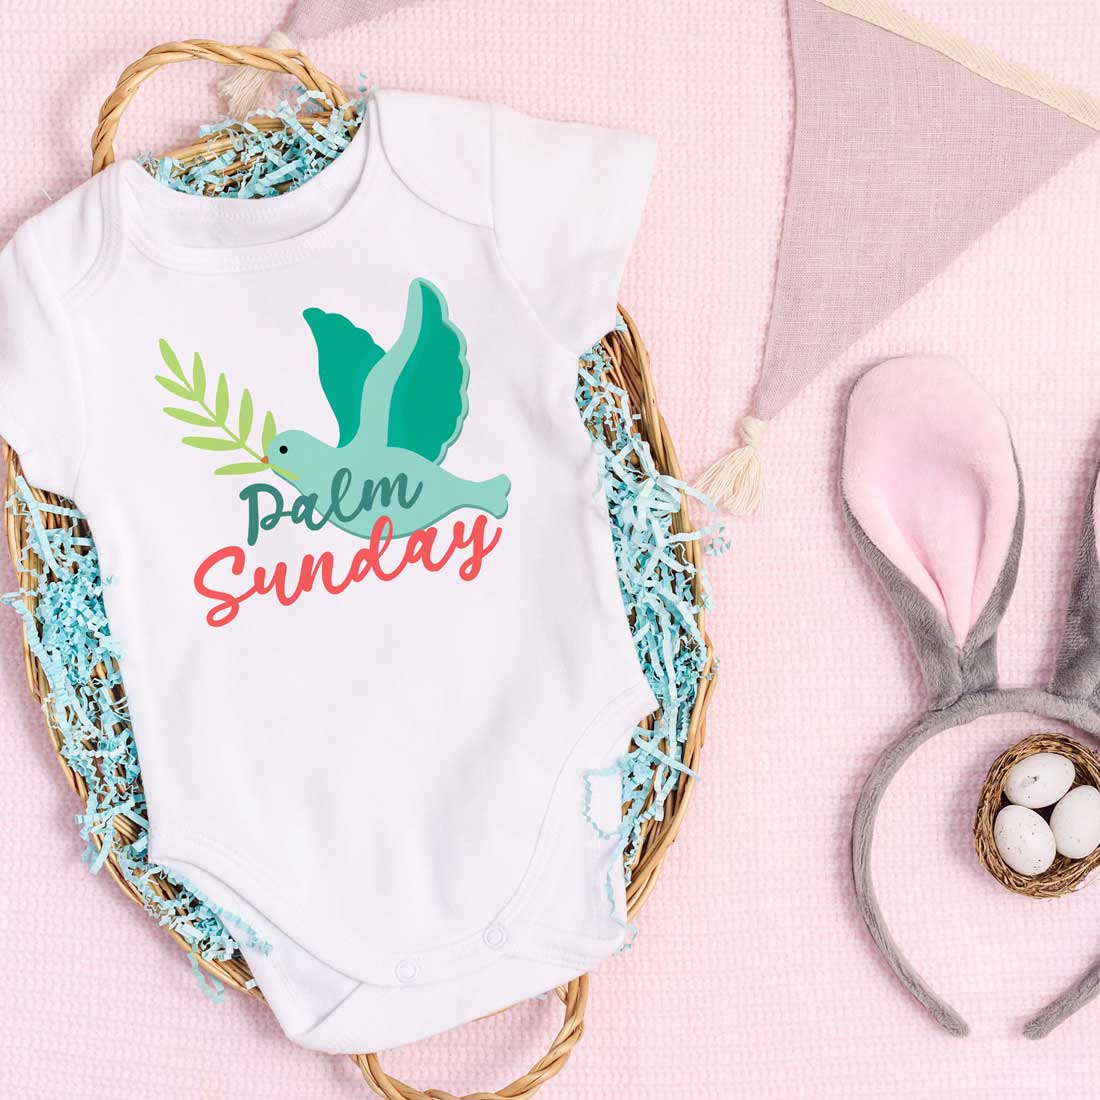 Baby's bodysuit with a bunny on it next to a pair of.